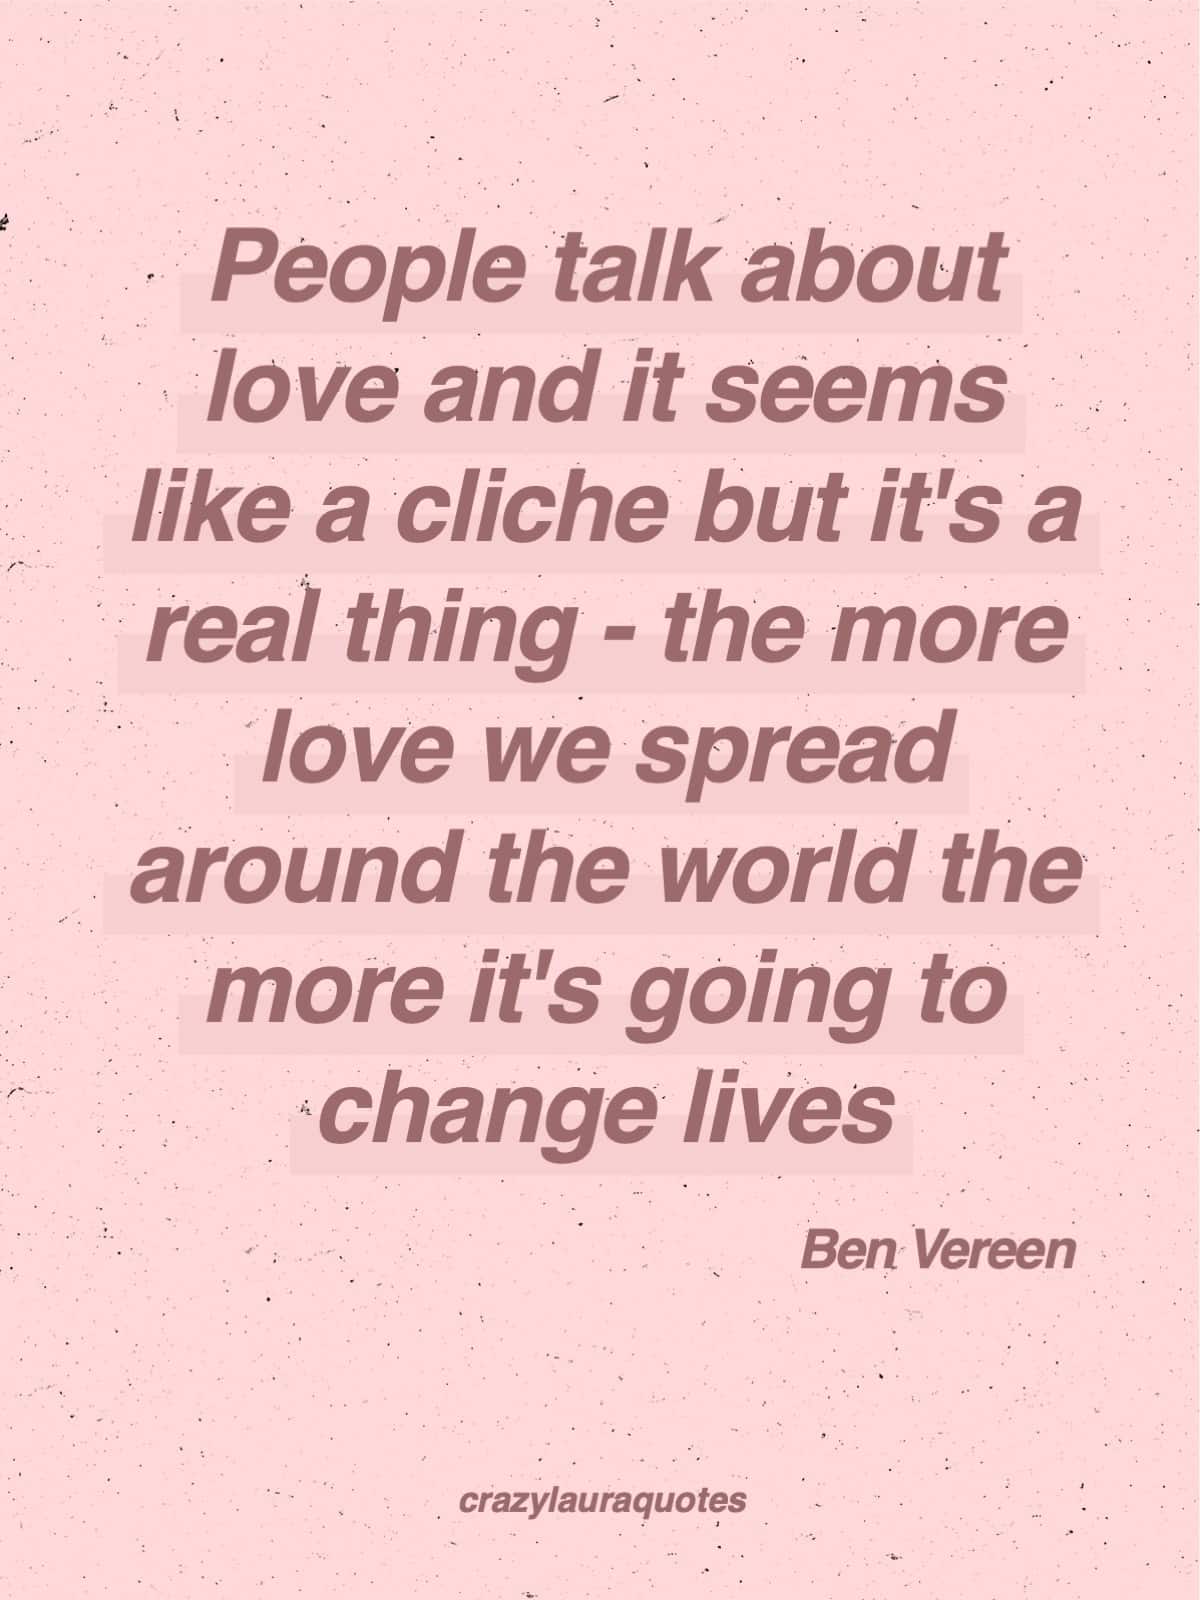 changing lives with love ben vereen quote